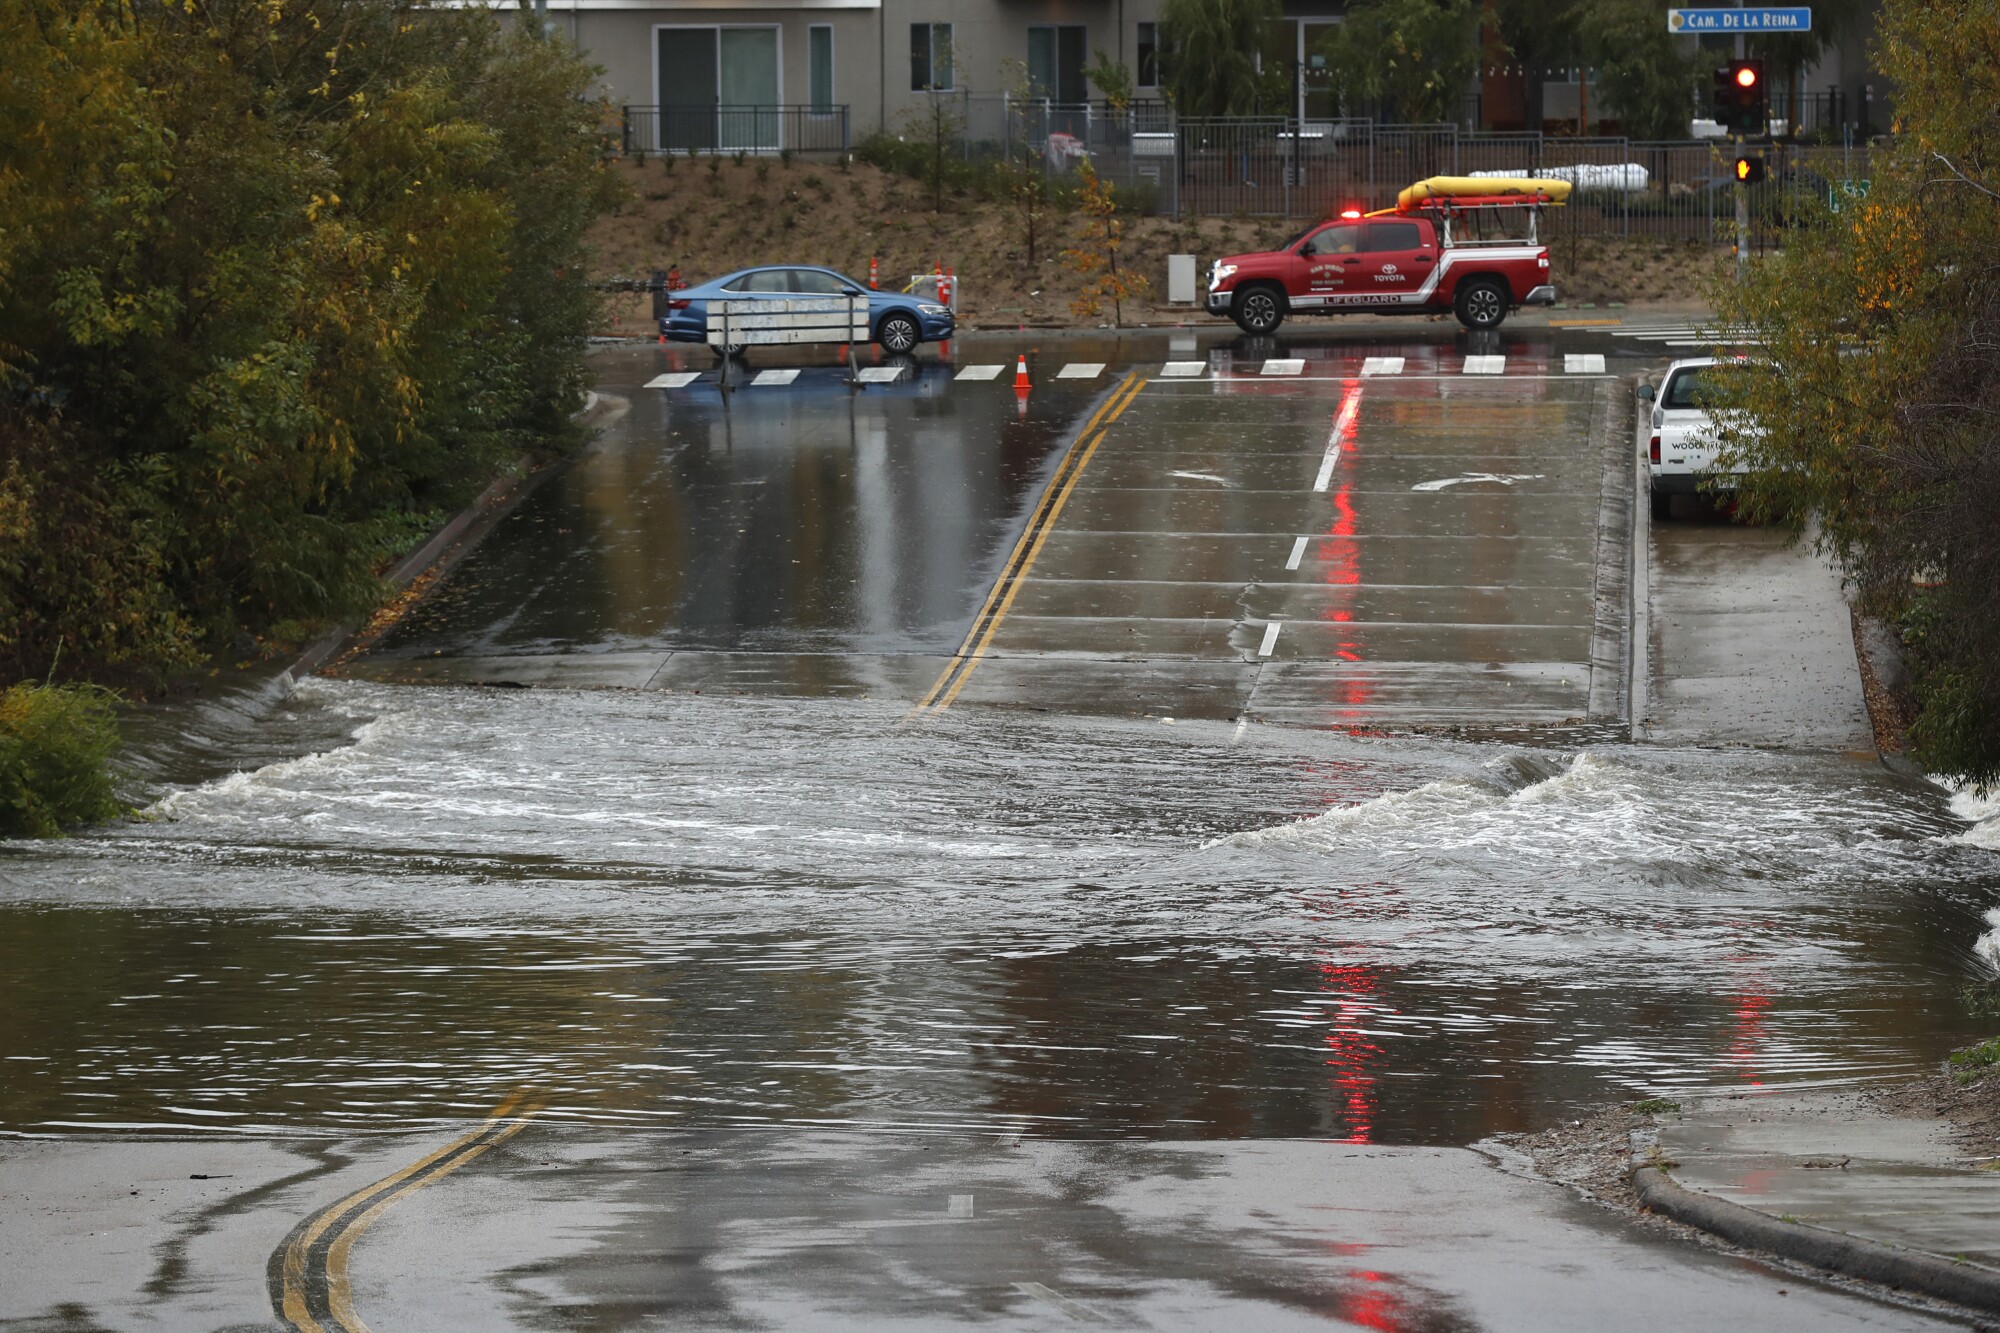 A San Diego Lifeguard swift water rescue team drives by a flooded Avenida Del Rio during a storm on Tuesday.